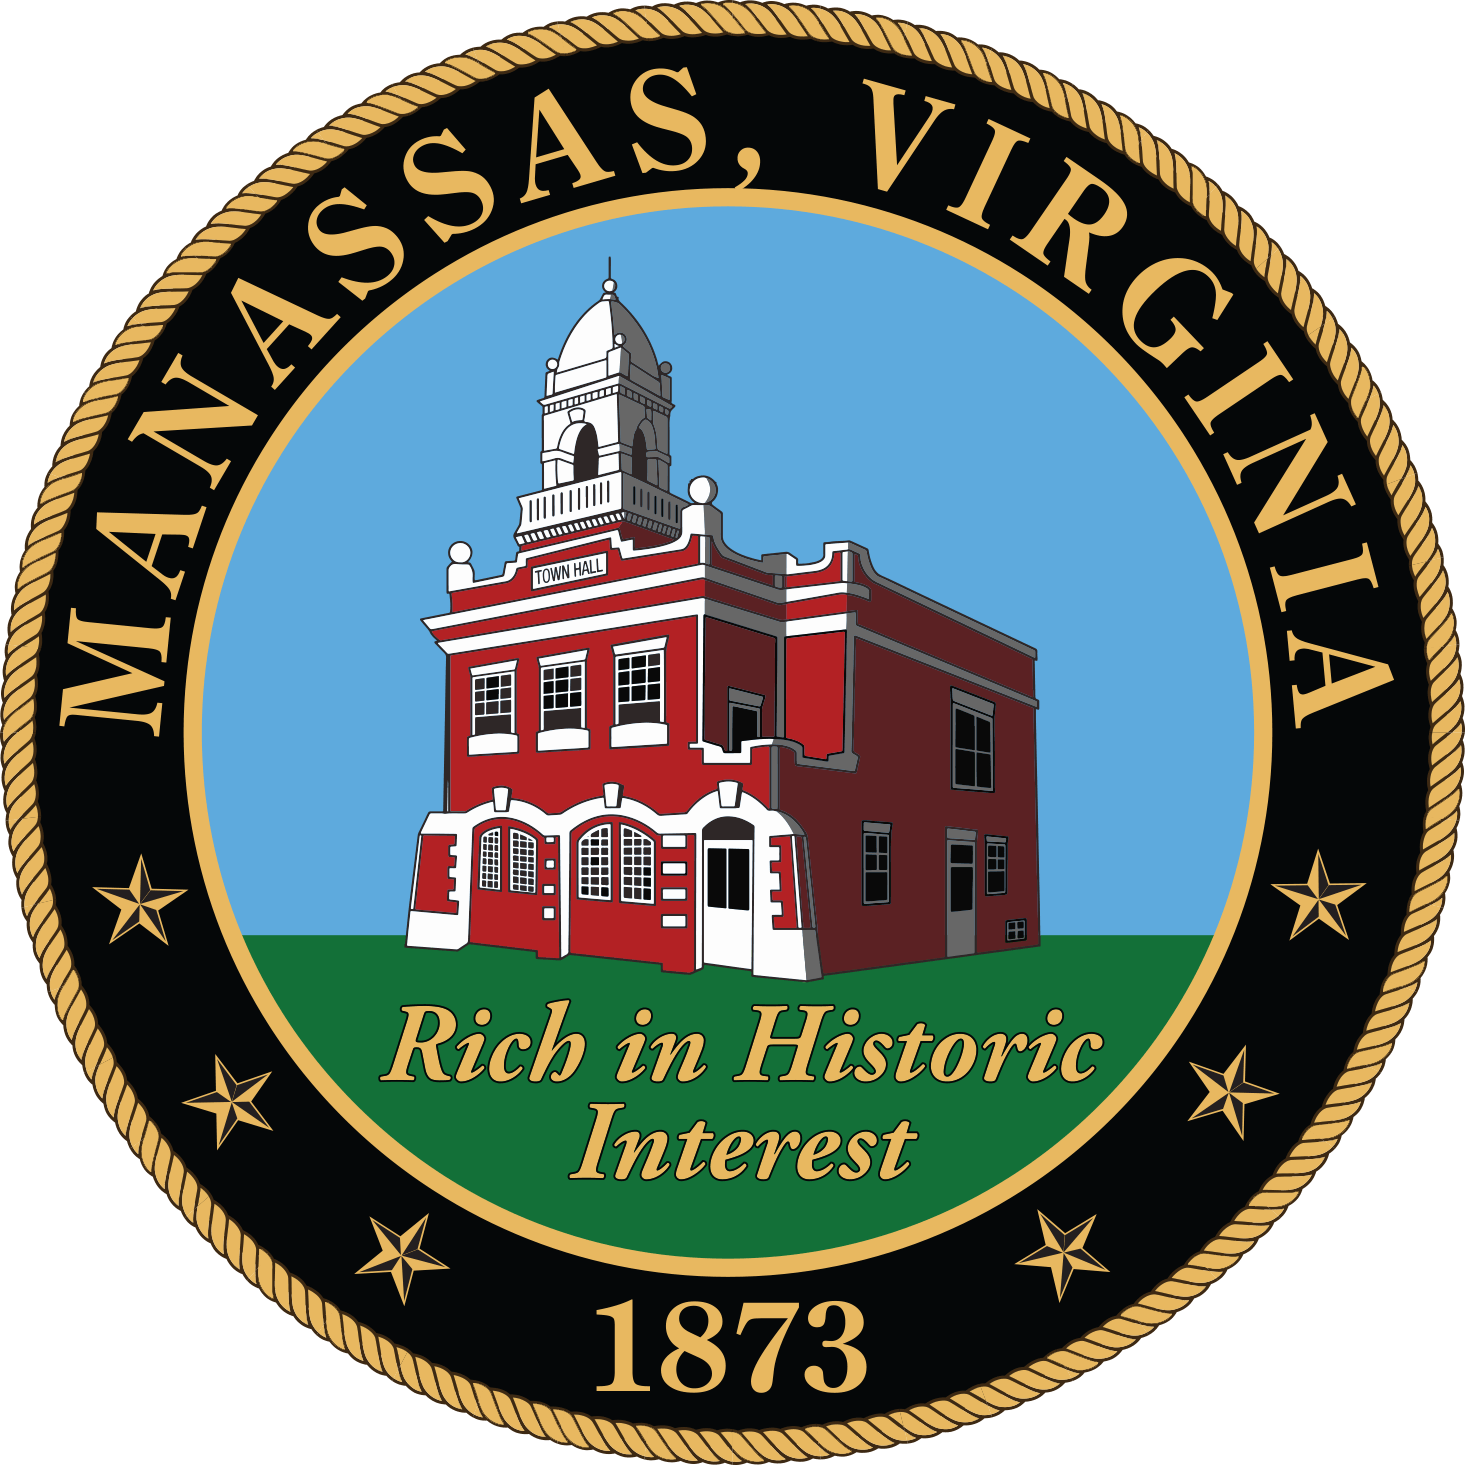 Manassas Logo - Class Specifications. Sorted by ClassTitle ascending. Welcome to